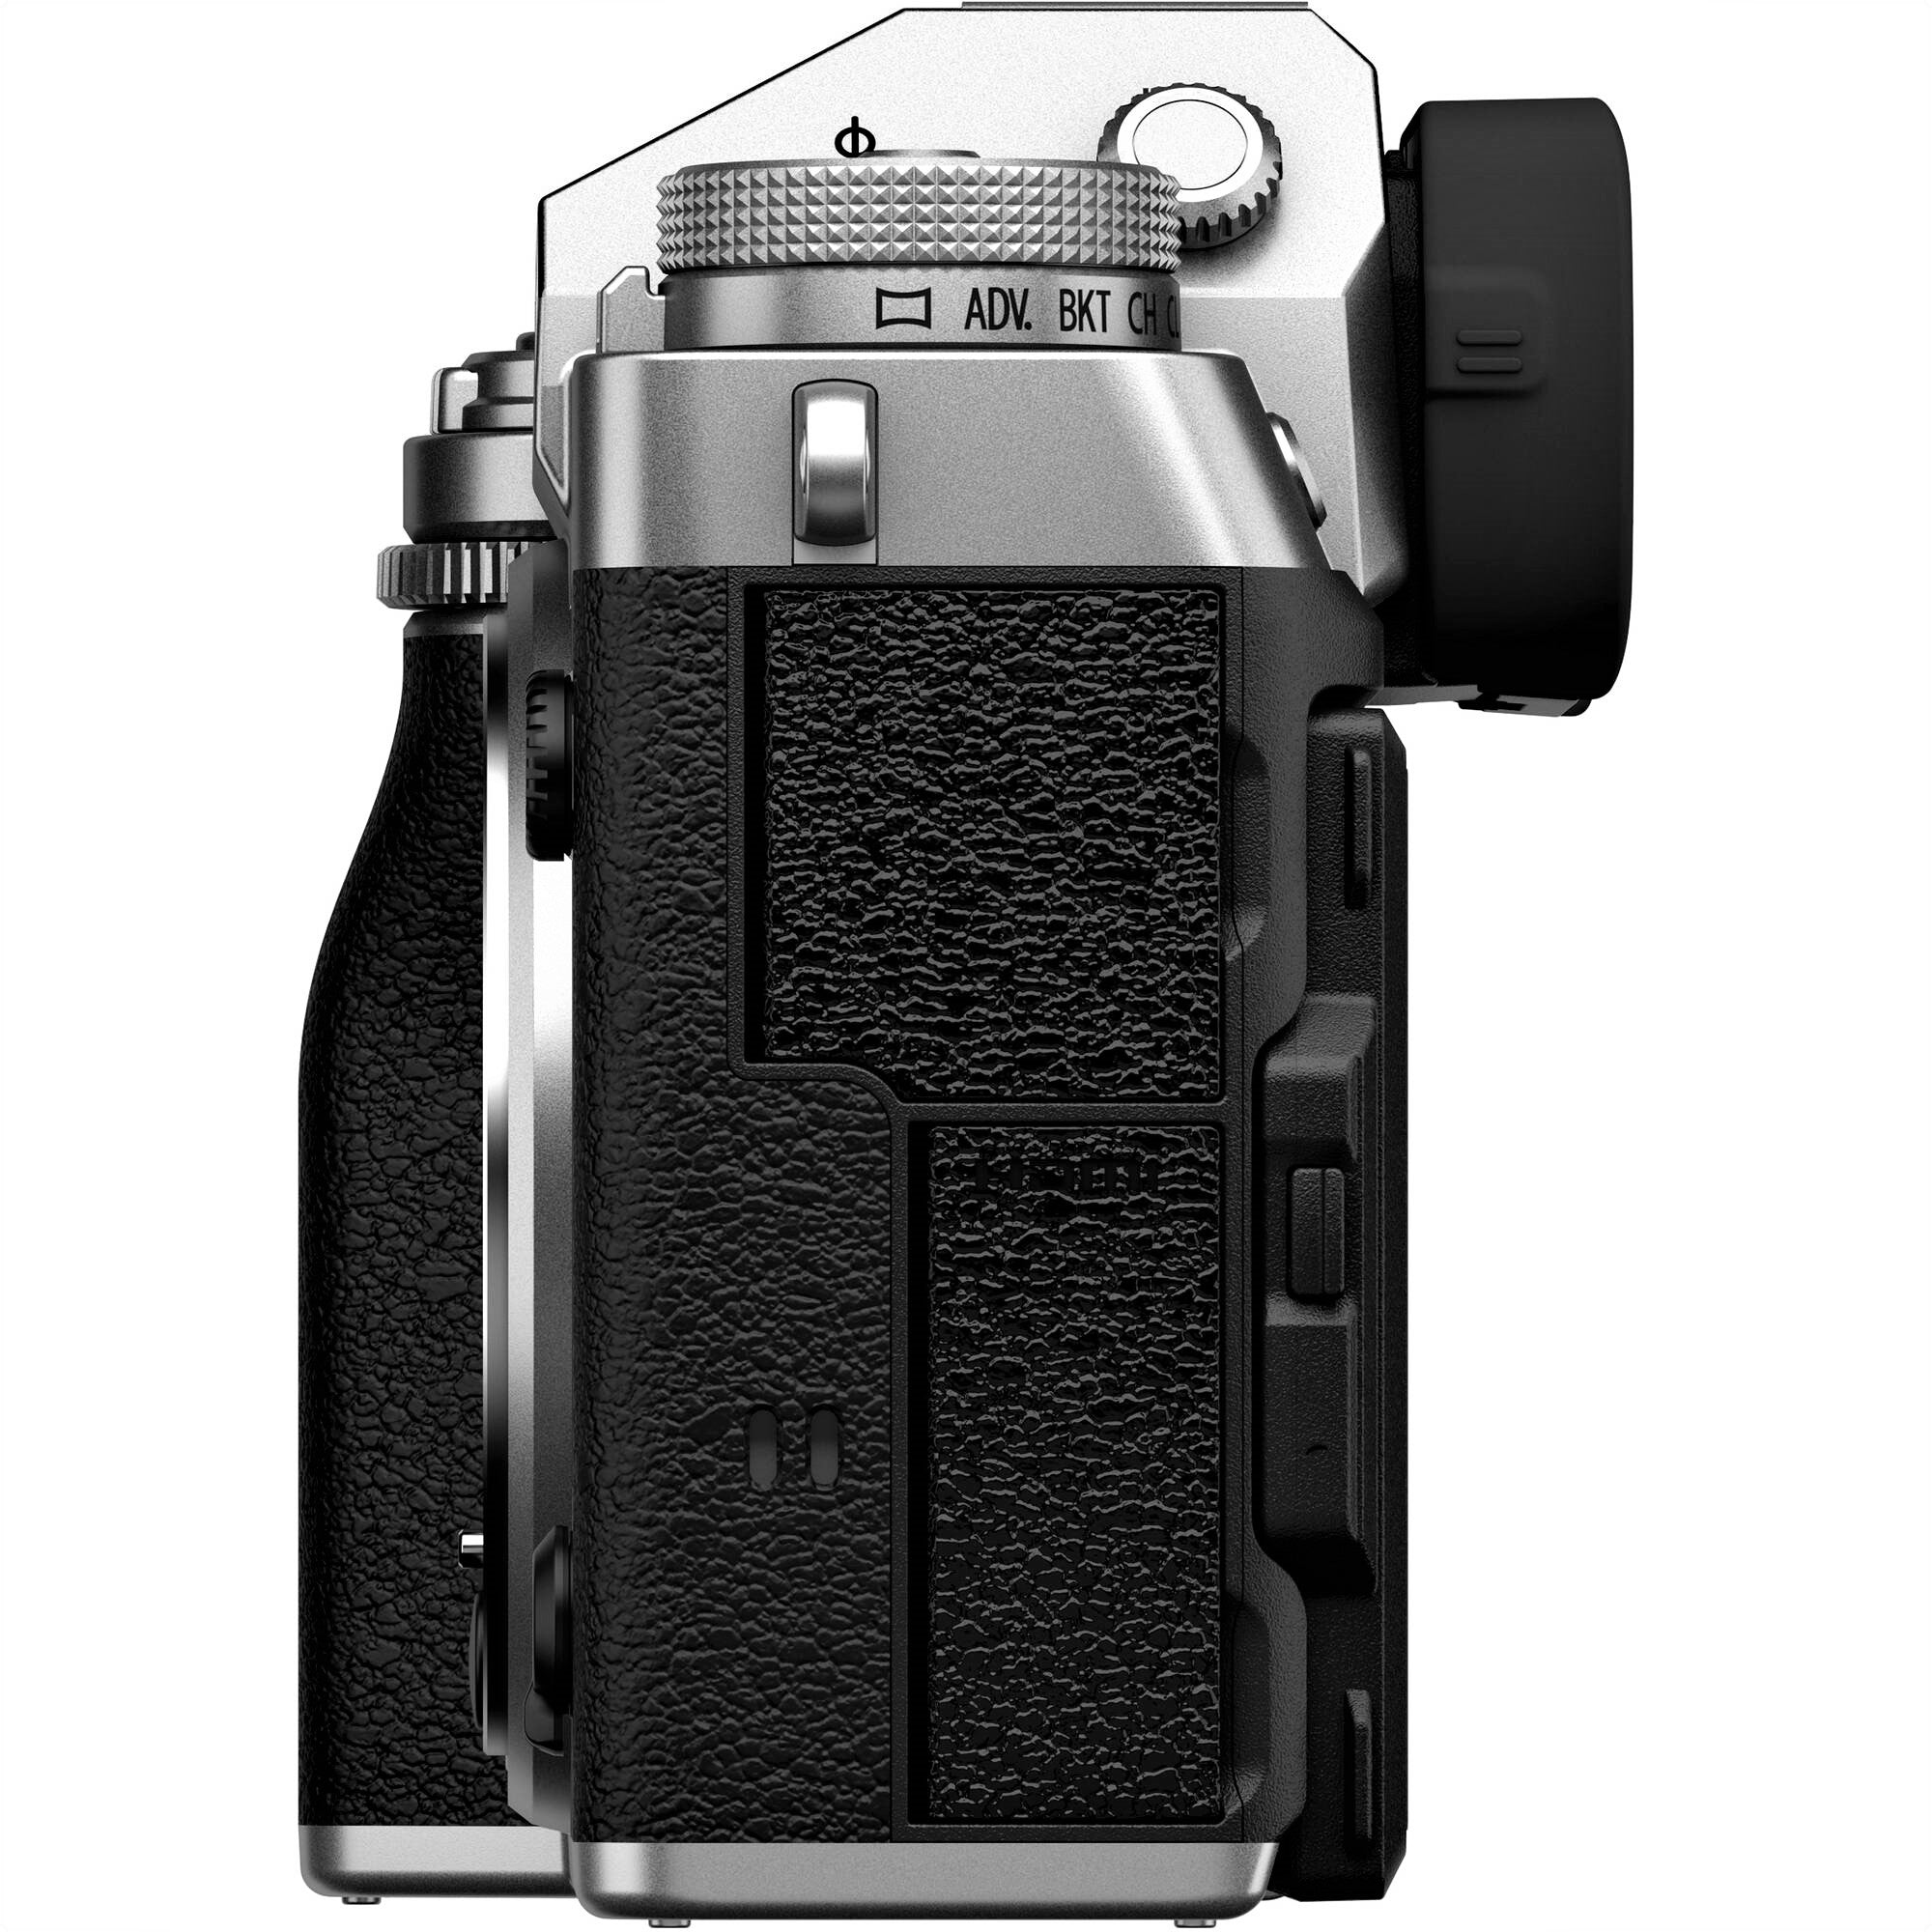 Fujifilm X-T5 Mirrorless Camera with 16-80mm Lens (Silver) - Side View